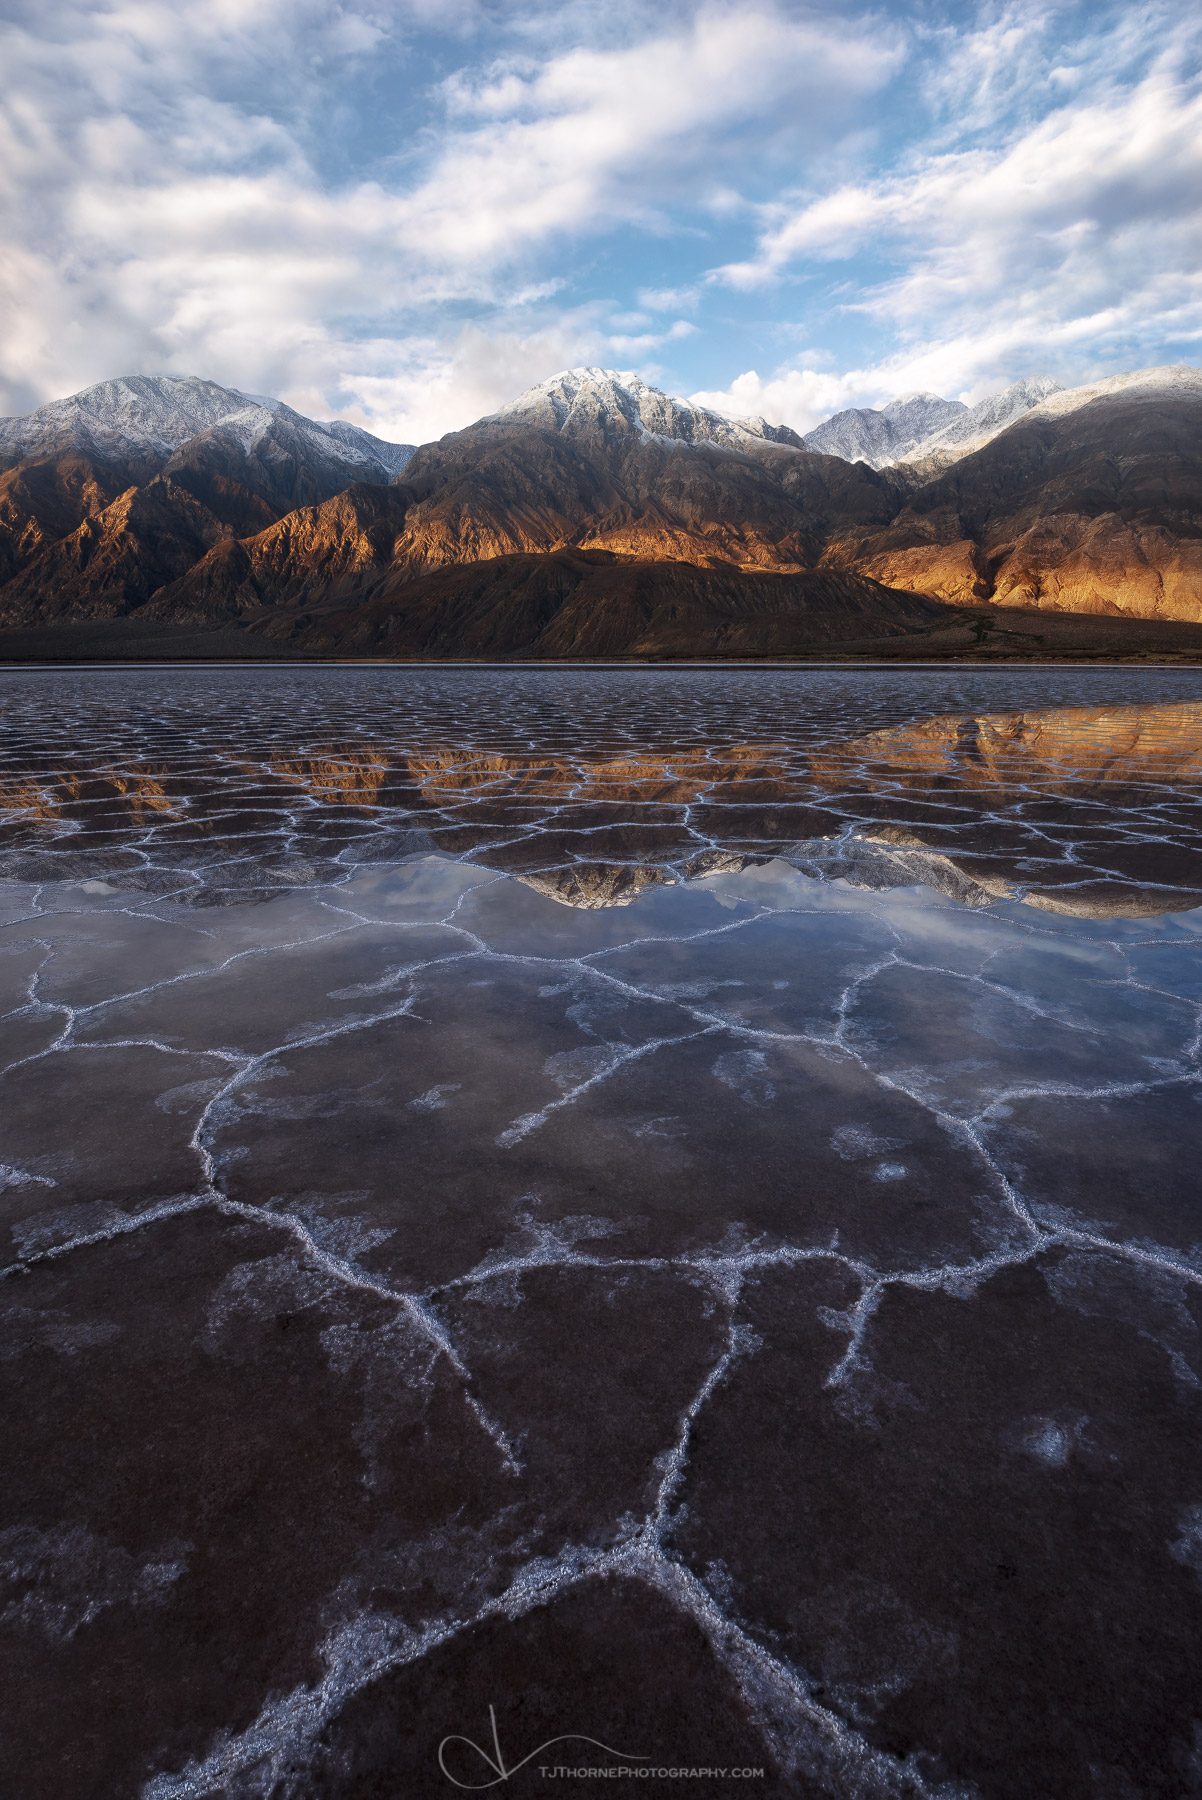 FINE ART LIMITED EDITION OF 100 This is a photo of some rare conditions at a remote salt lake in Death Valley National Park...